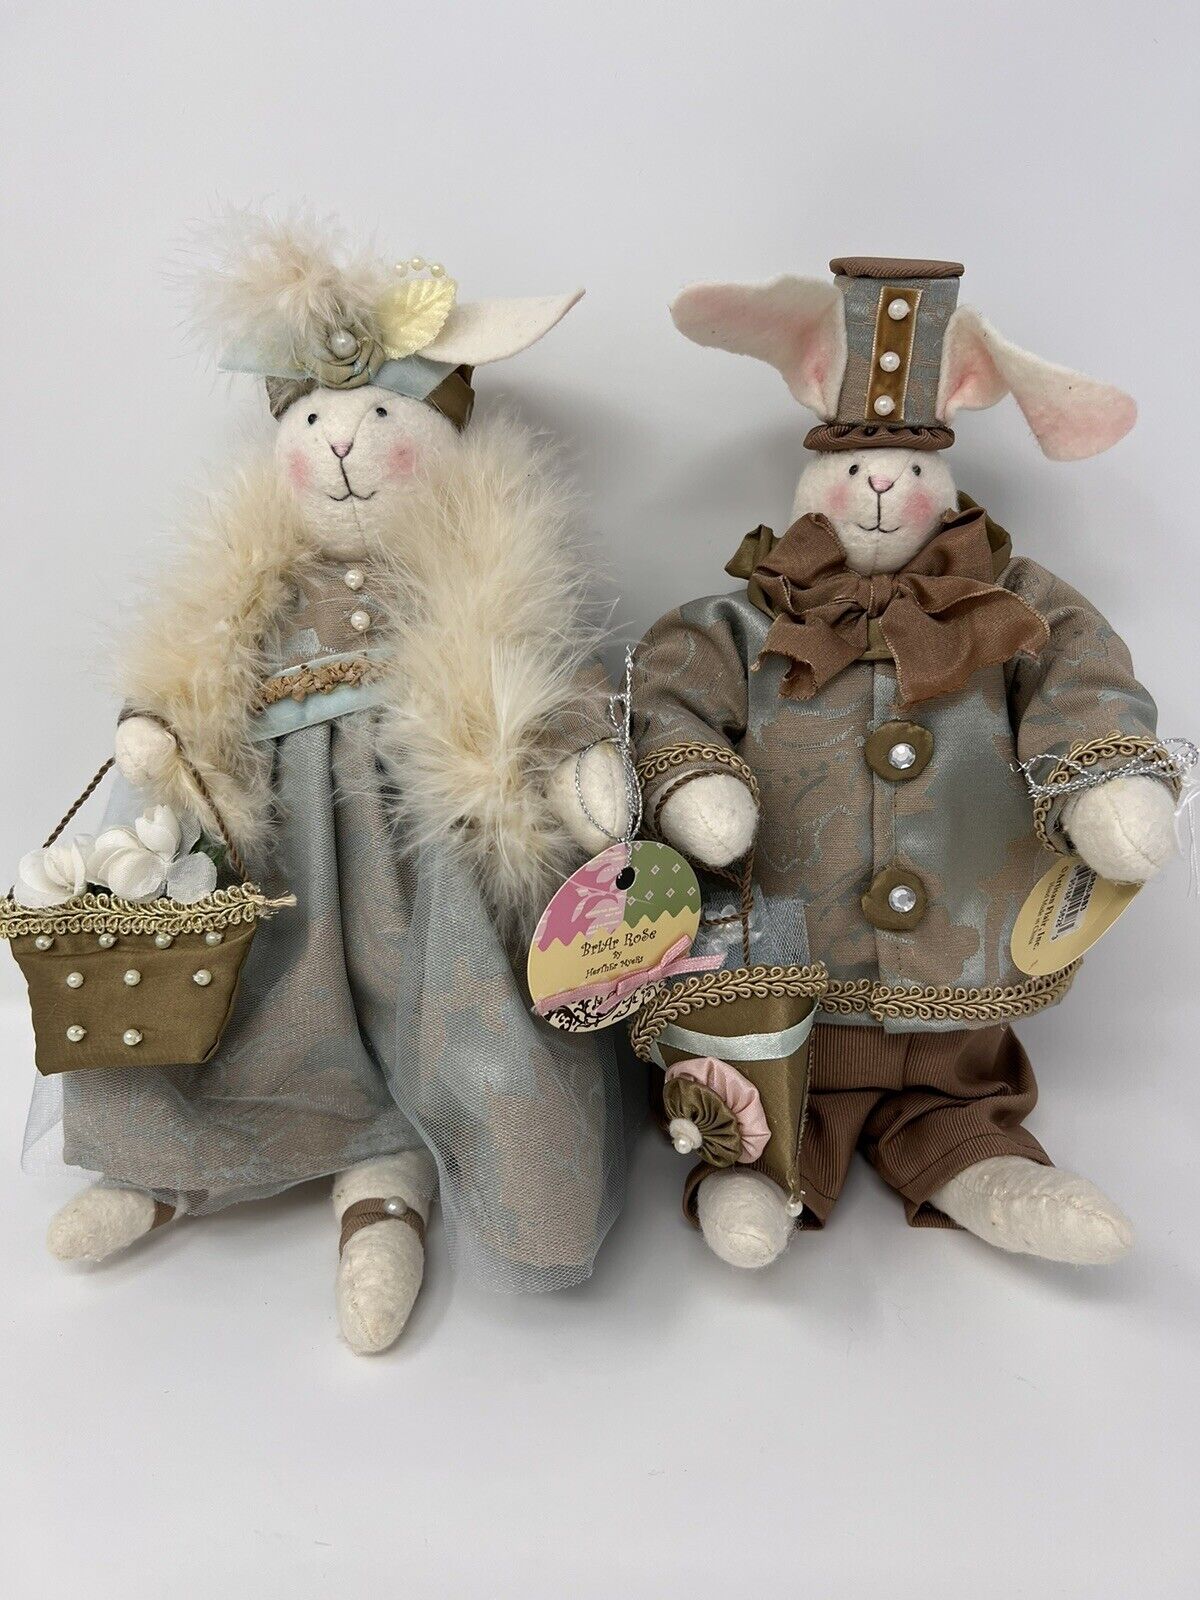 Adorable Plush Victorian Bunny Rabbits Briar Rose Set by Heather Myers